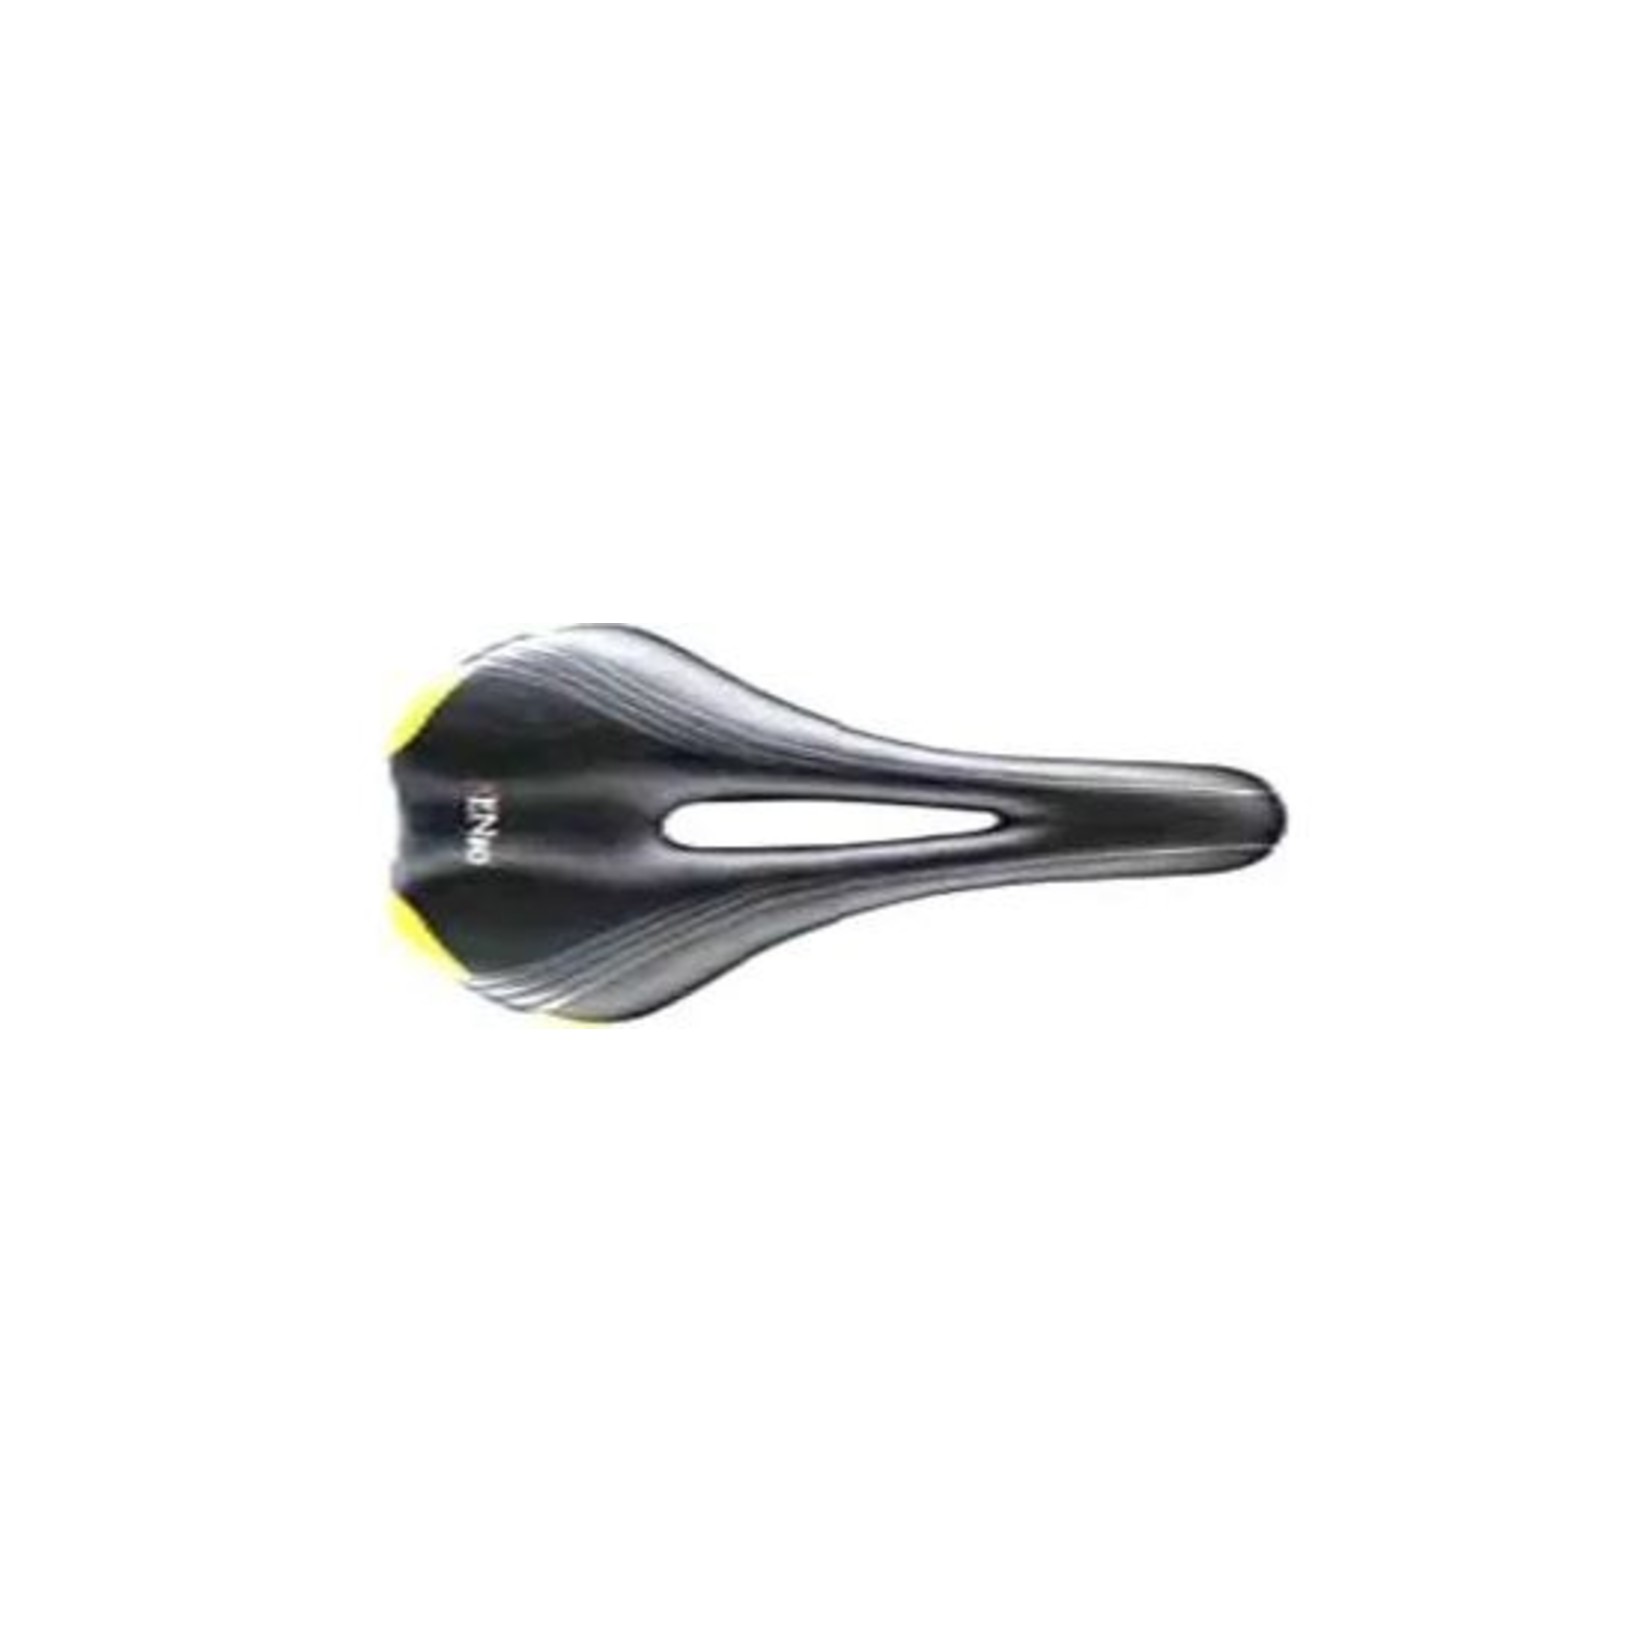 Velo Velo Bike/Cycling Senso Competition Racing Saddle 200G Carbon/Ti - 272mmX135mm